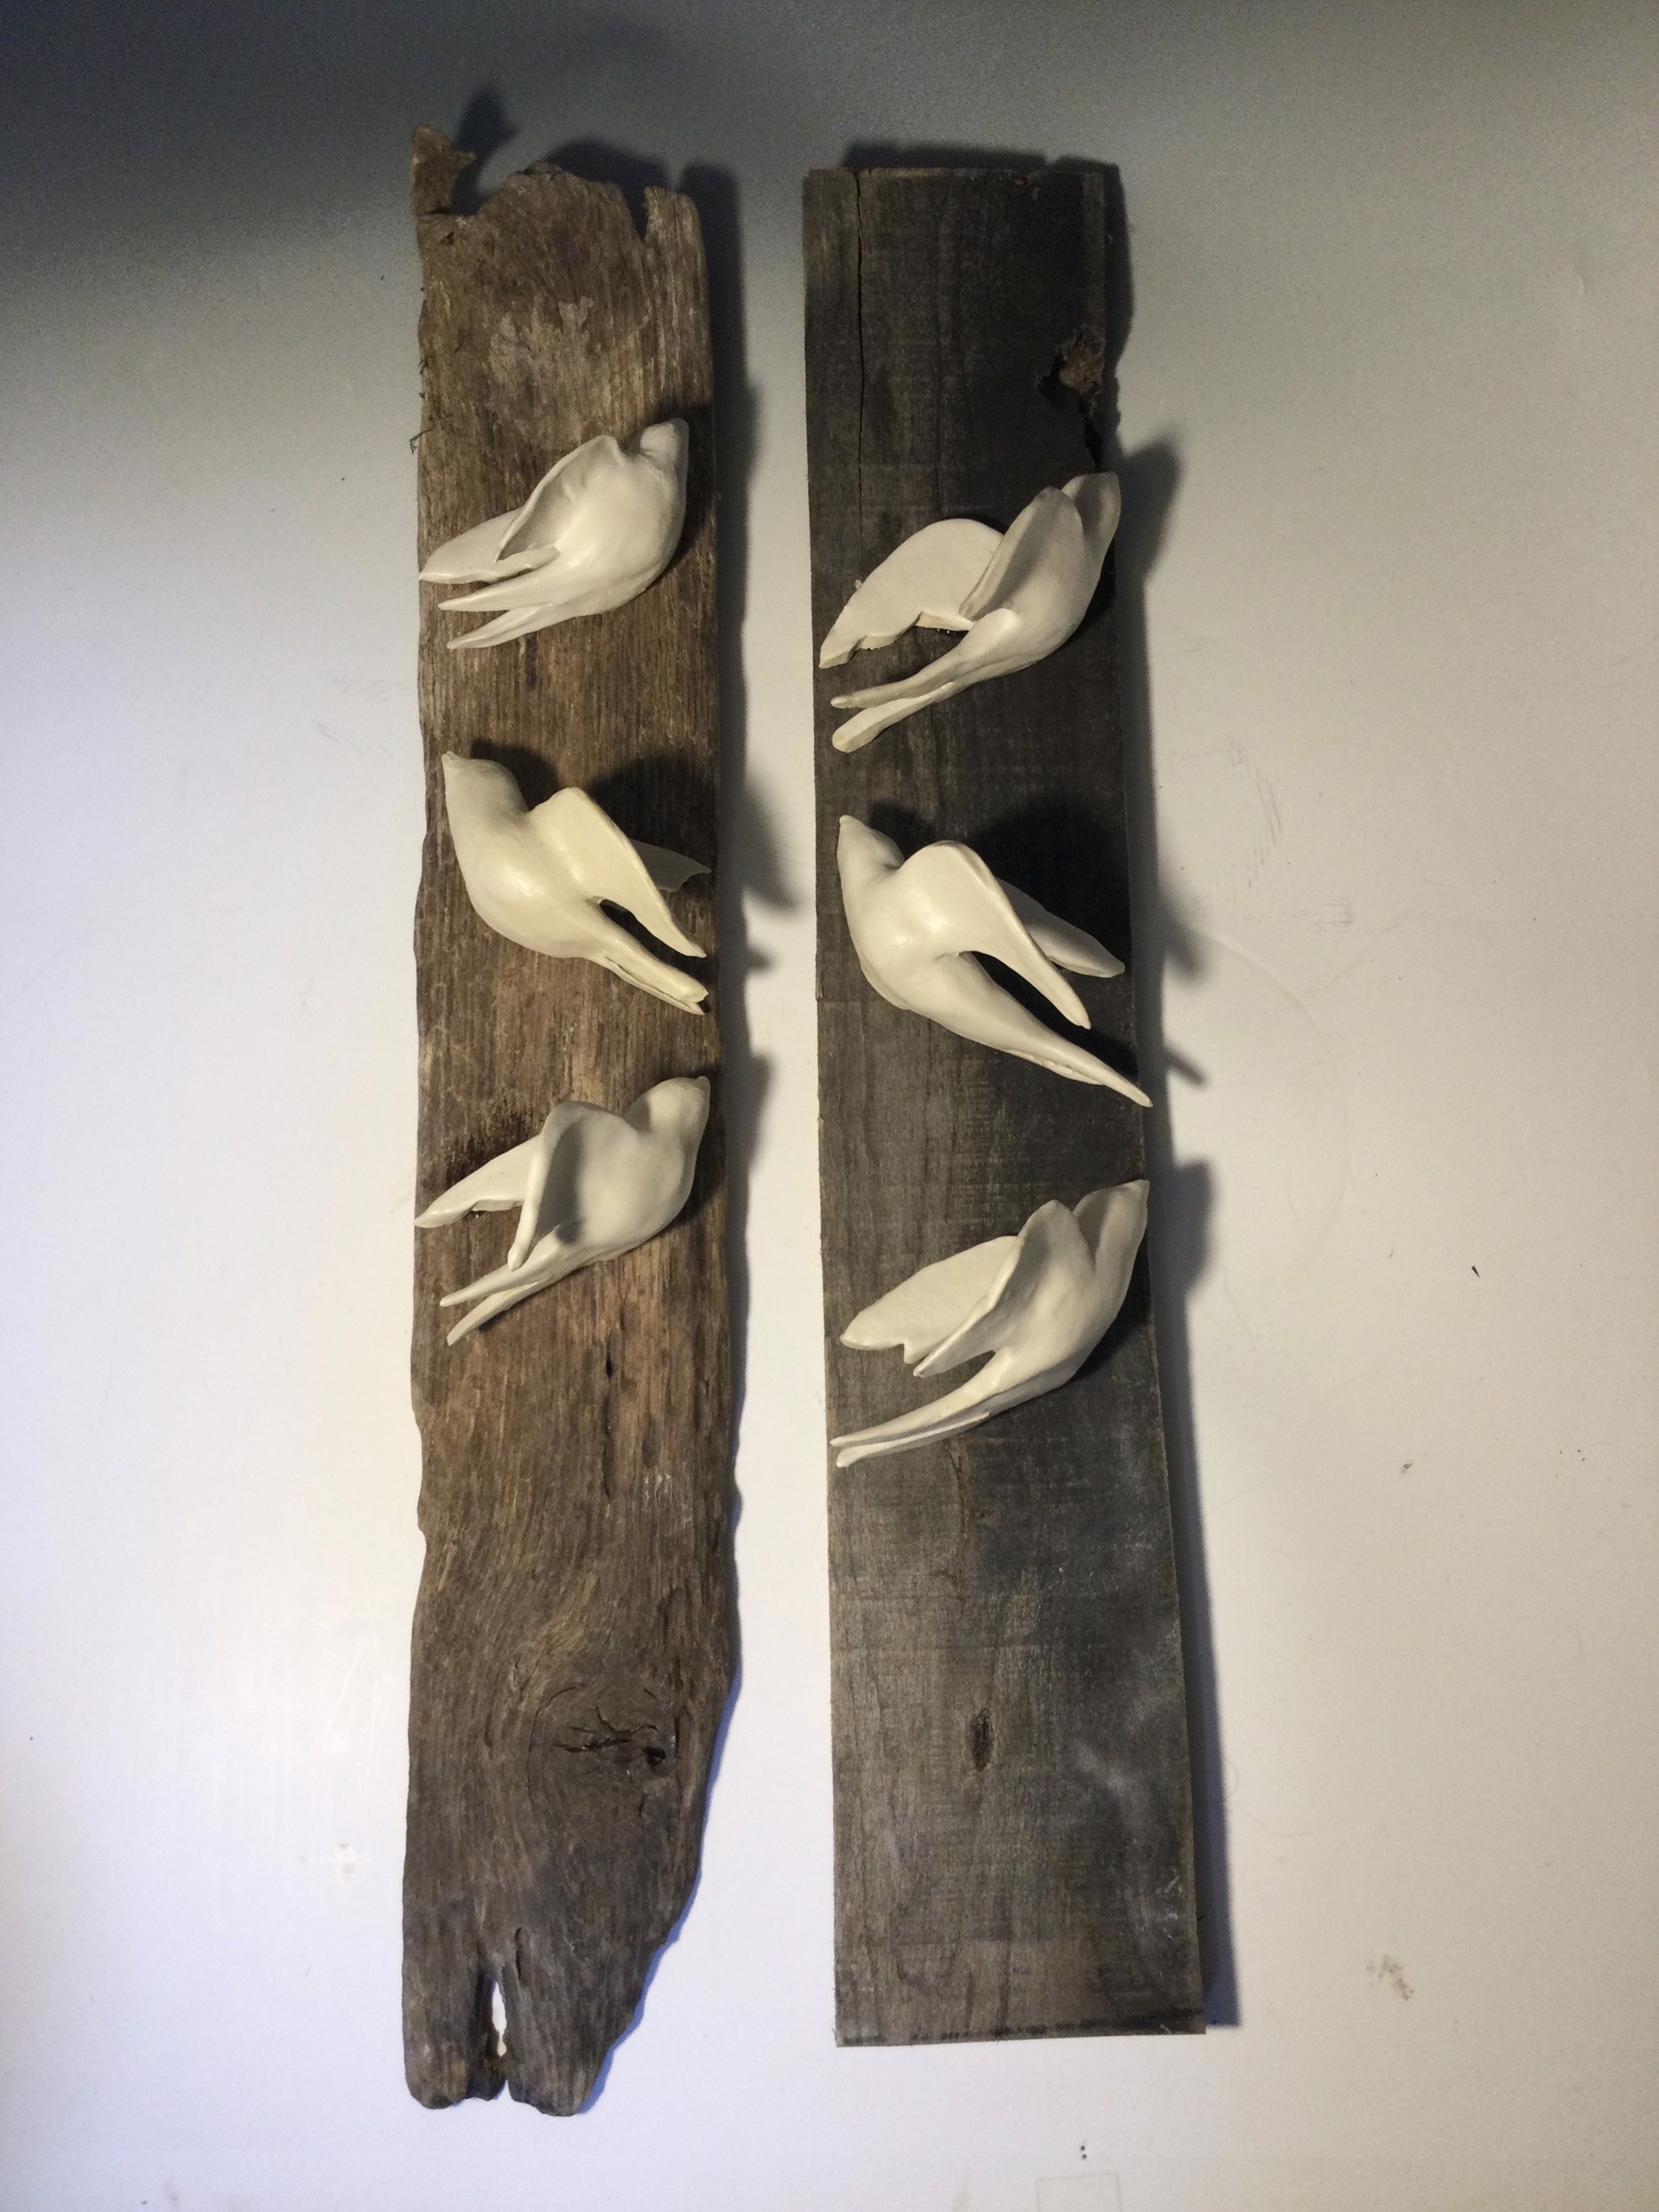 Sparrows on Barnwood by Anna M. Elrod